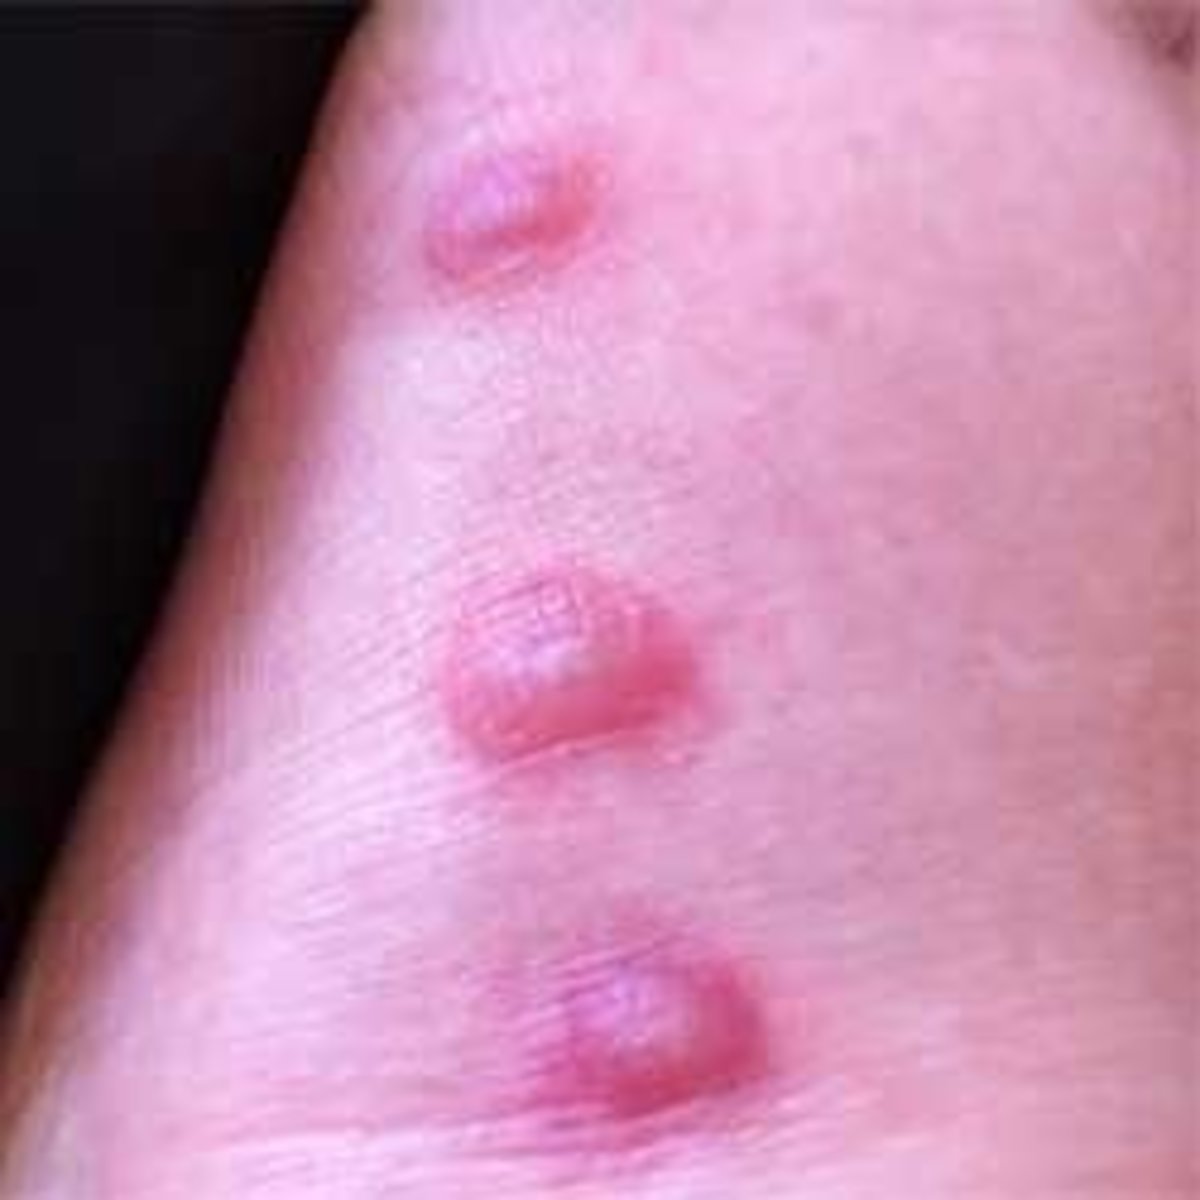 A picture of three Bullous Pemphigoid blisters